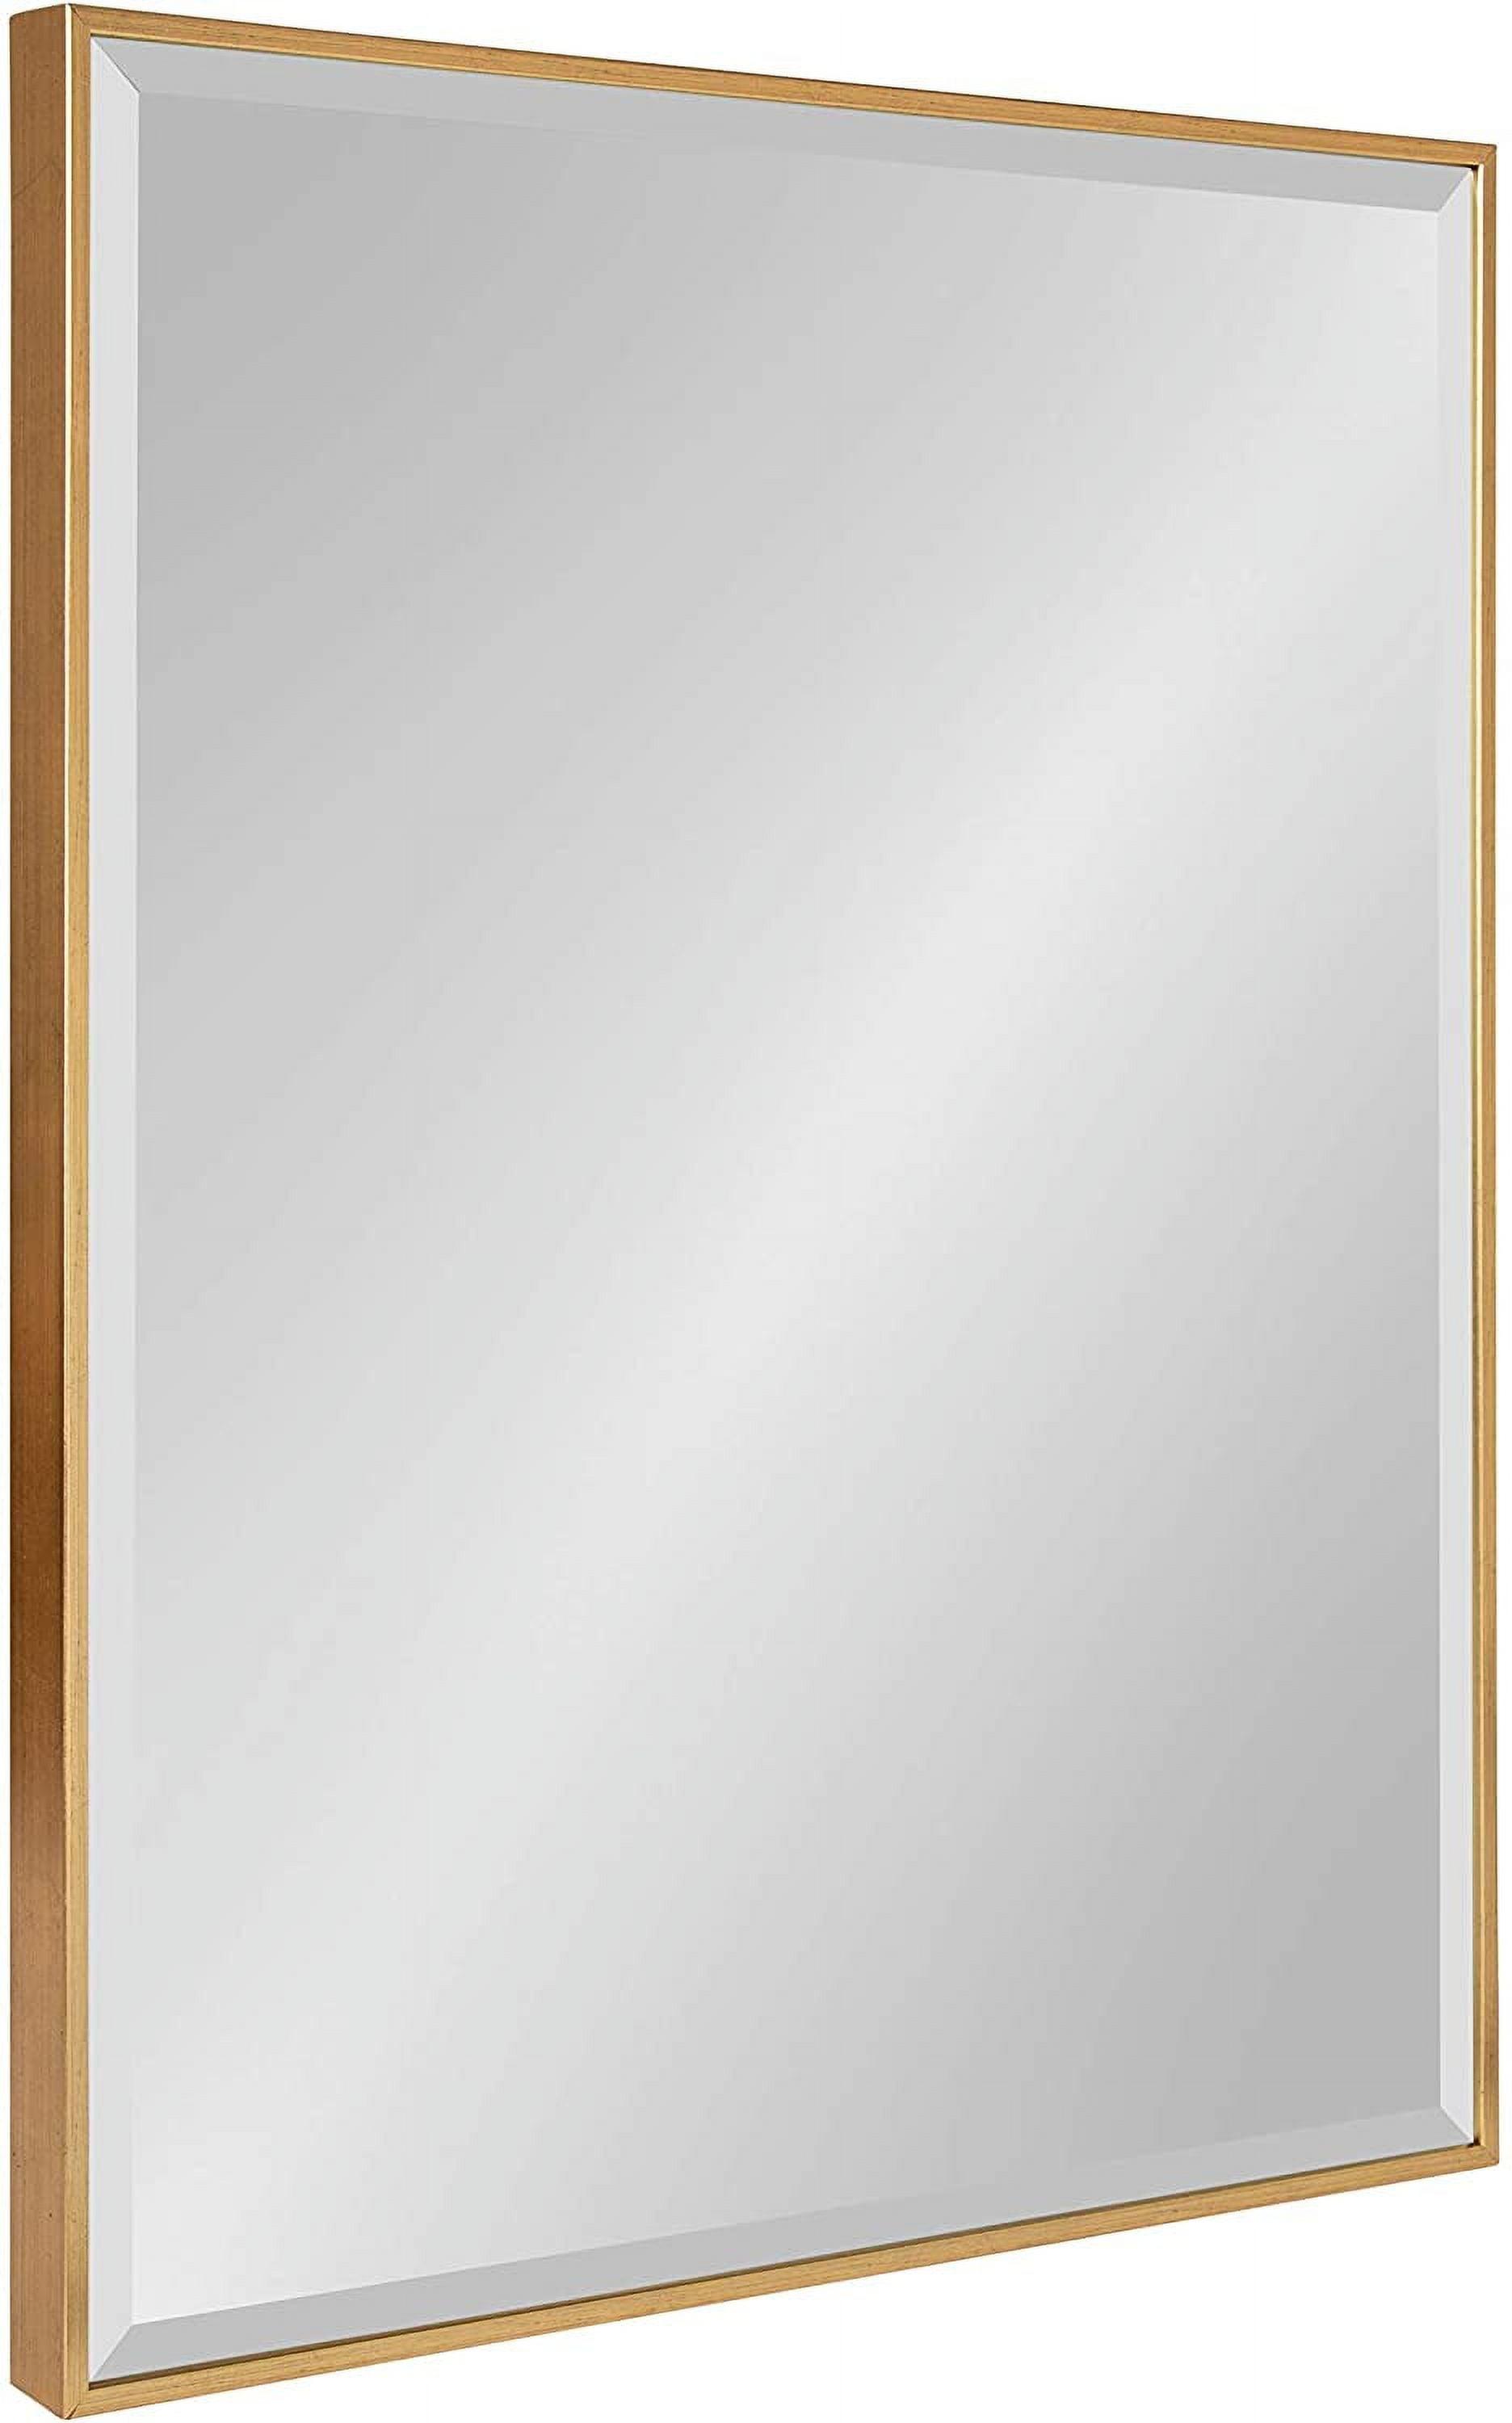 Rhodes Gold Rectangular Large Wall Mirror 22.75x28.75 Inches